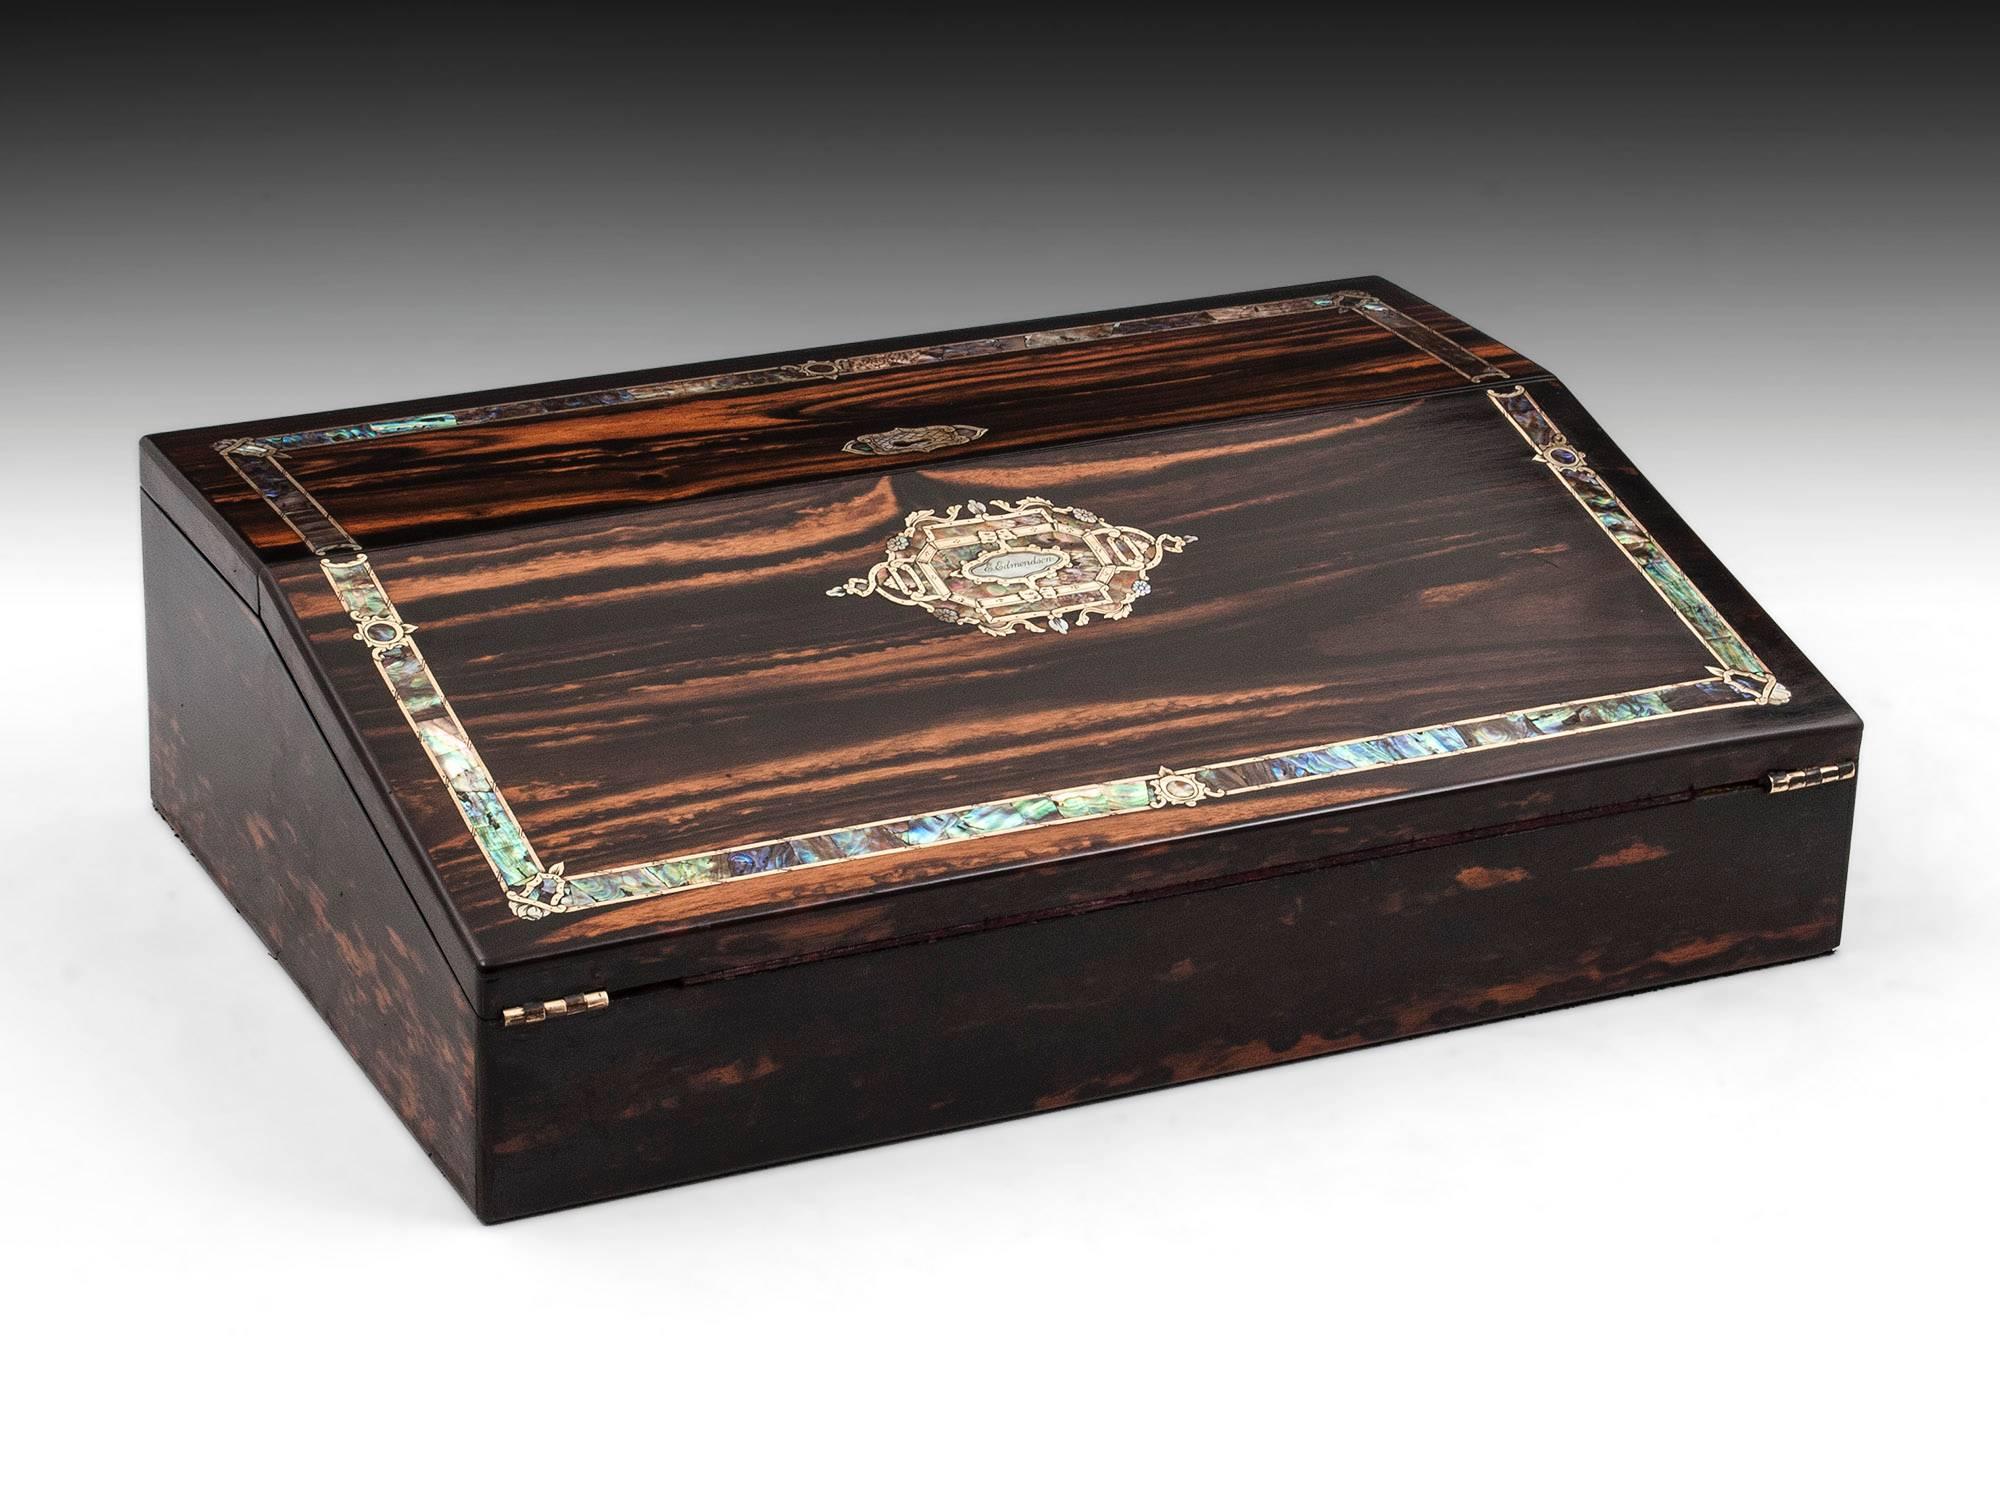 Exquisite coromandel writing box with beautiful engraved brass and abalone pearl border running around the top edge of the box, the intricate initial plate has a tinge of pink abalone shell. The mother of pearl is inscribed with the name E.